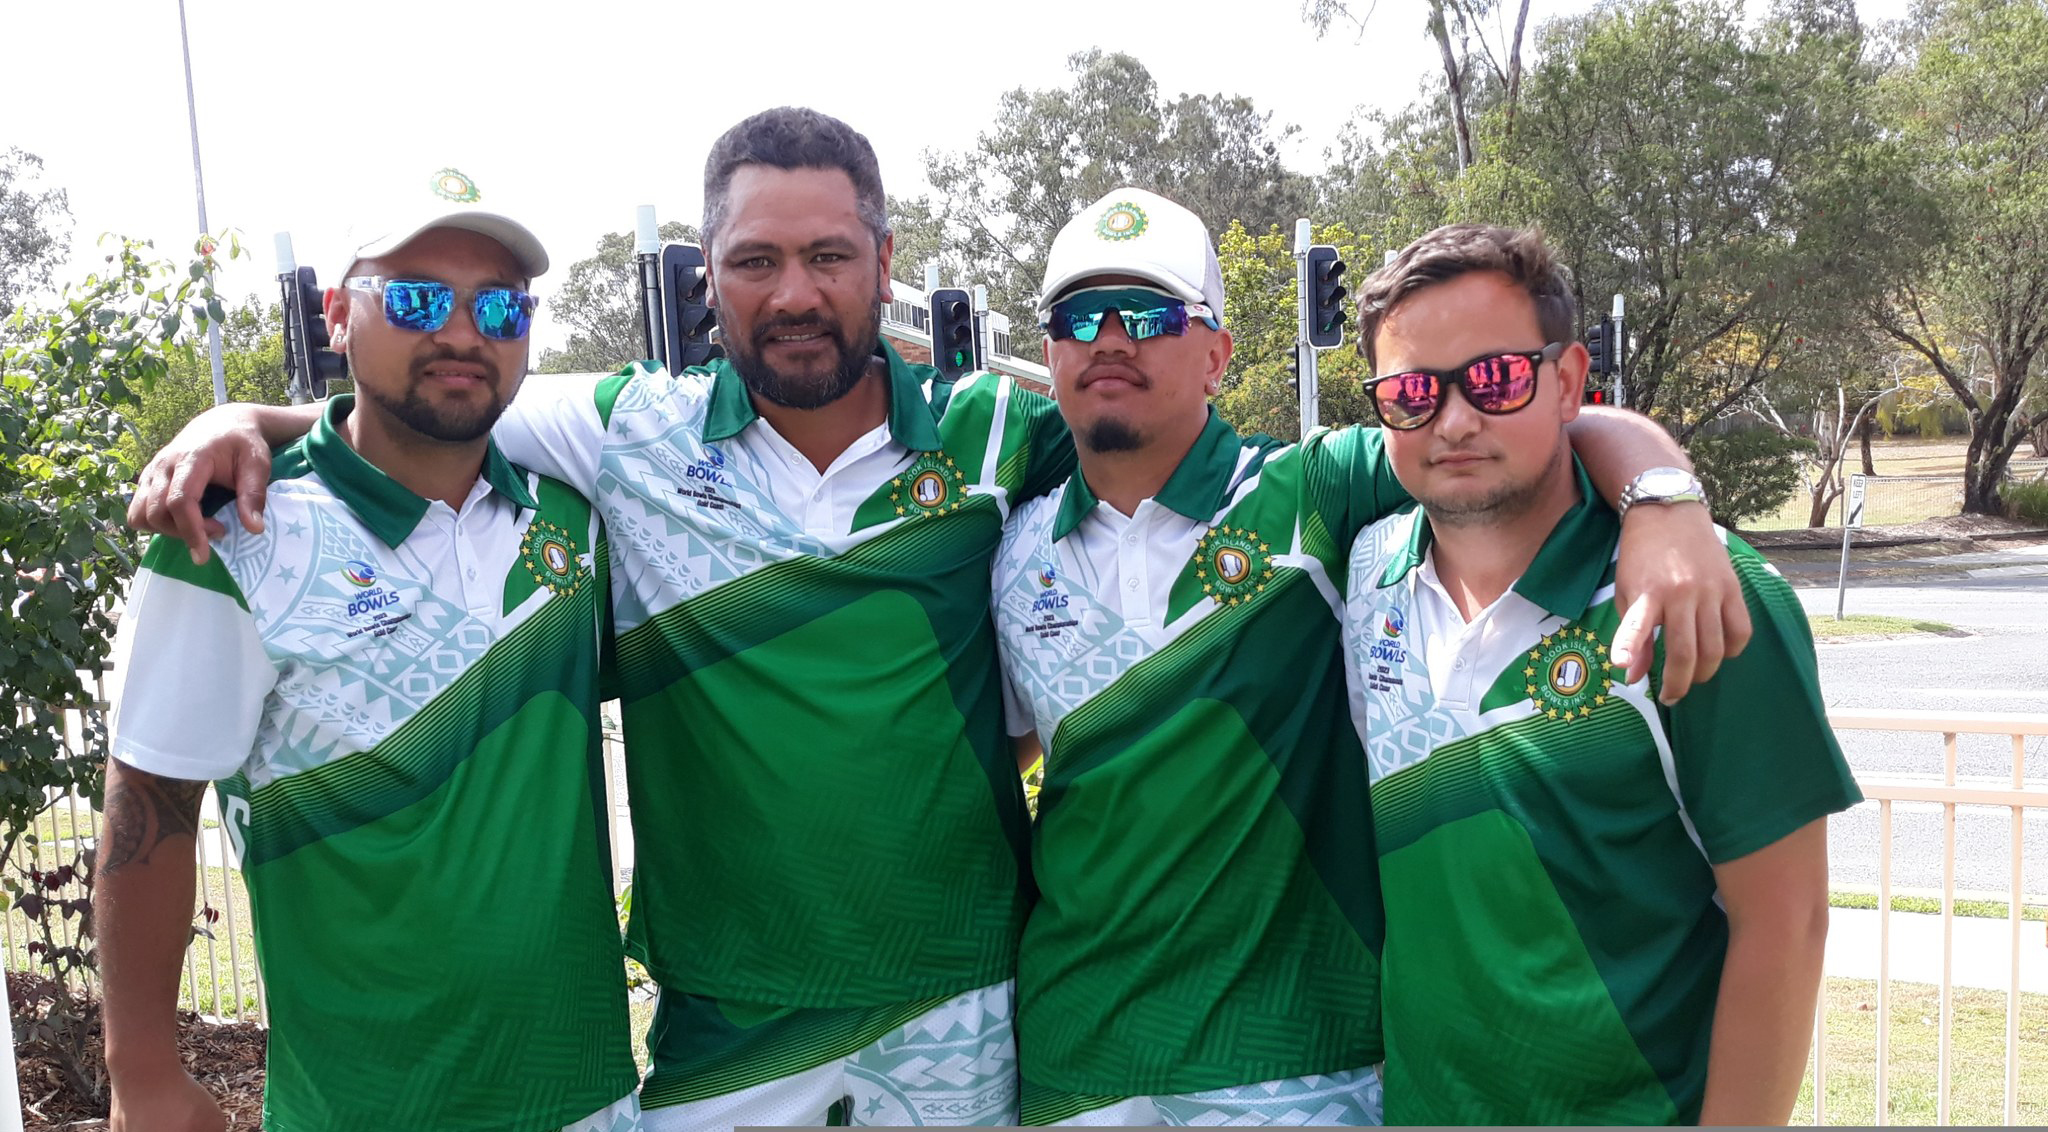 Cooks Men’s bowling team 8th place at 2023 World Bowls event